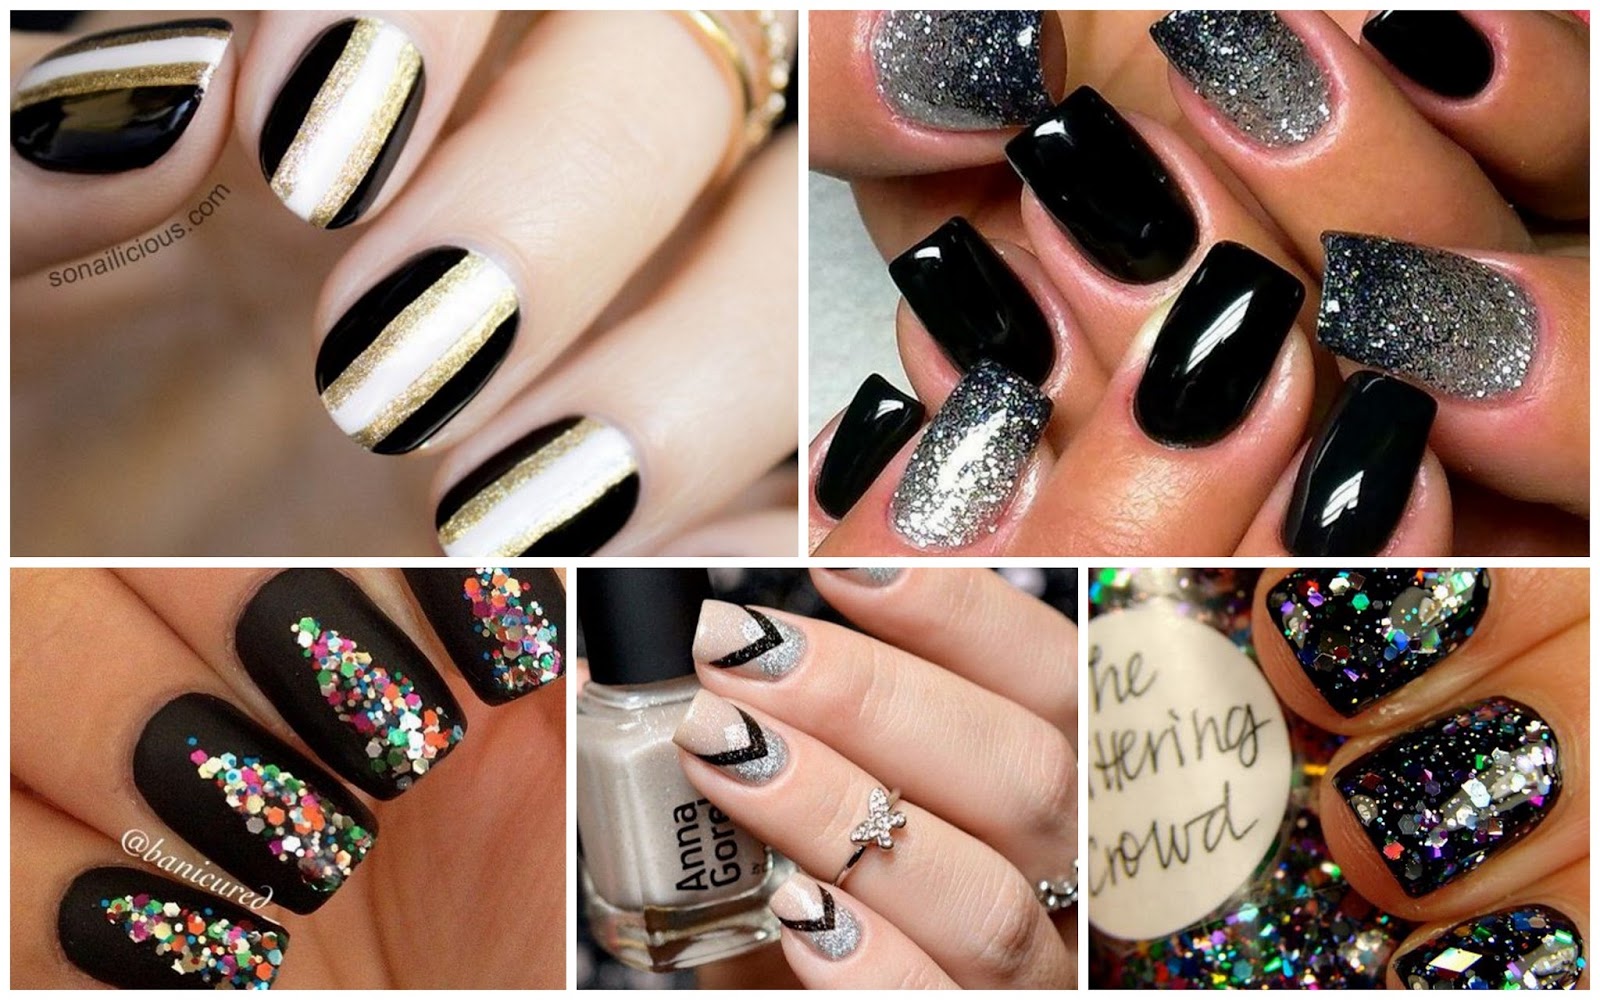 Sparkly Nails Are the Key to a Happy New Year - Yahoo Sports